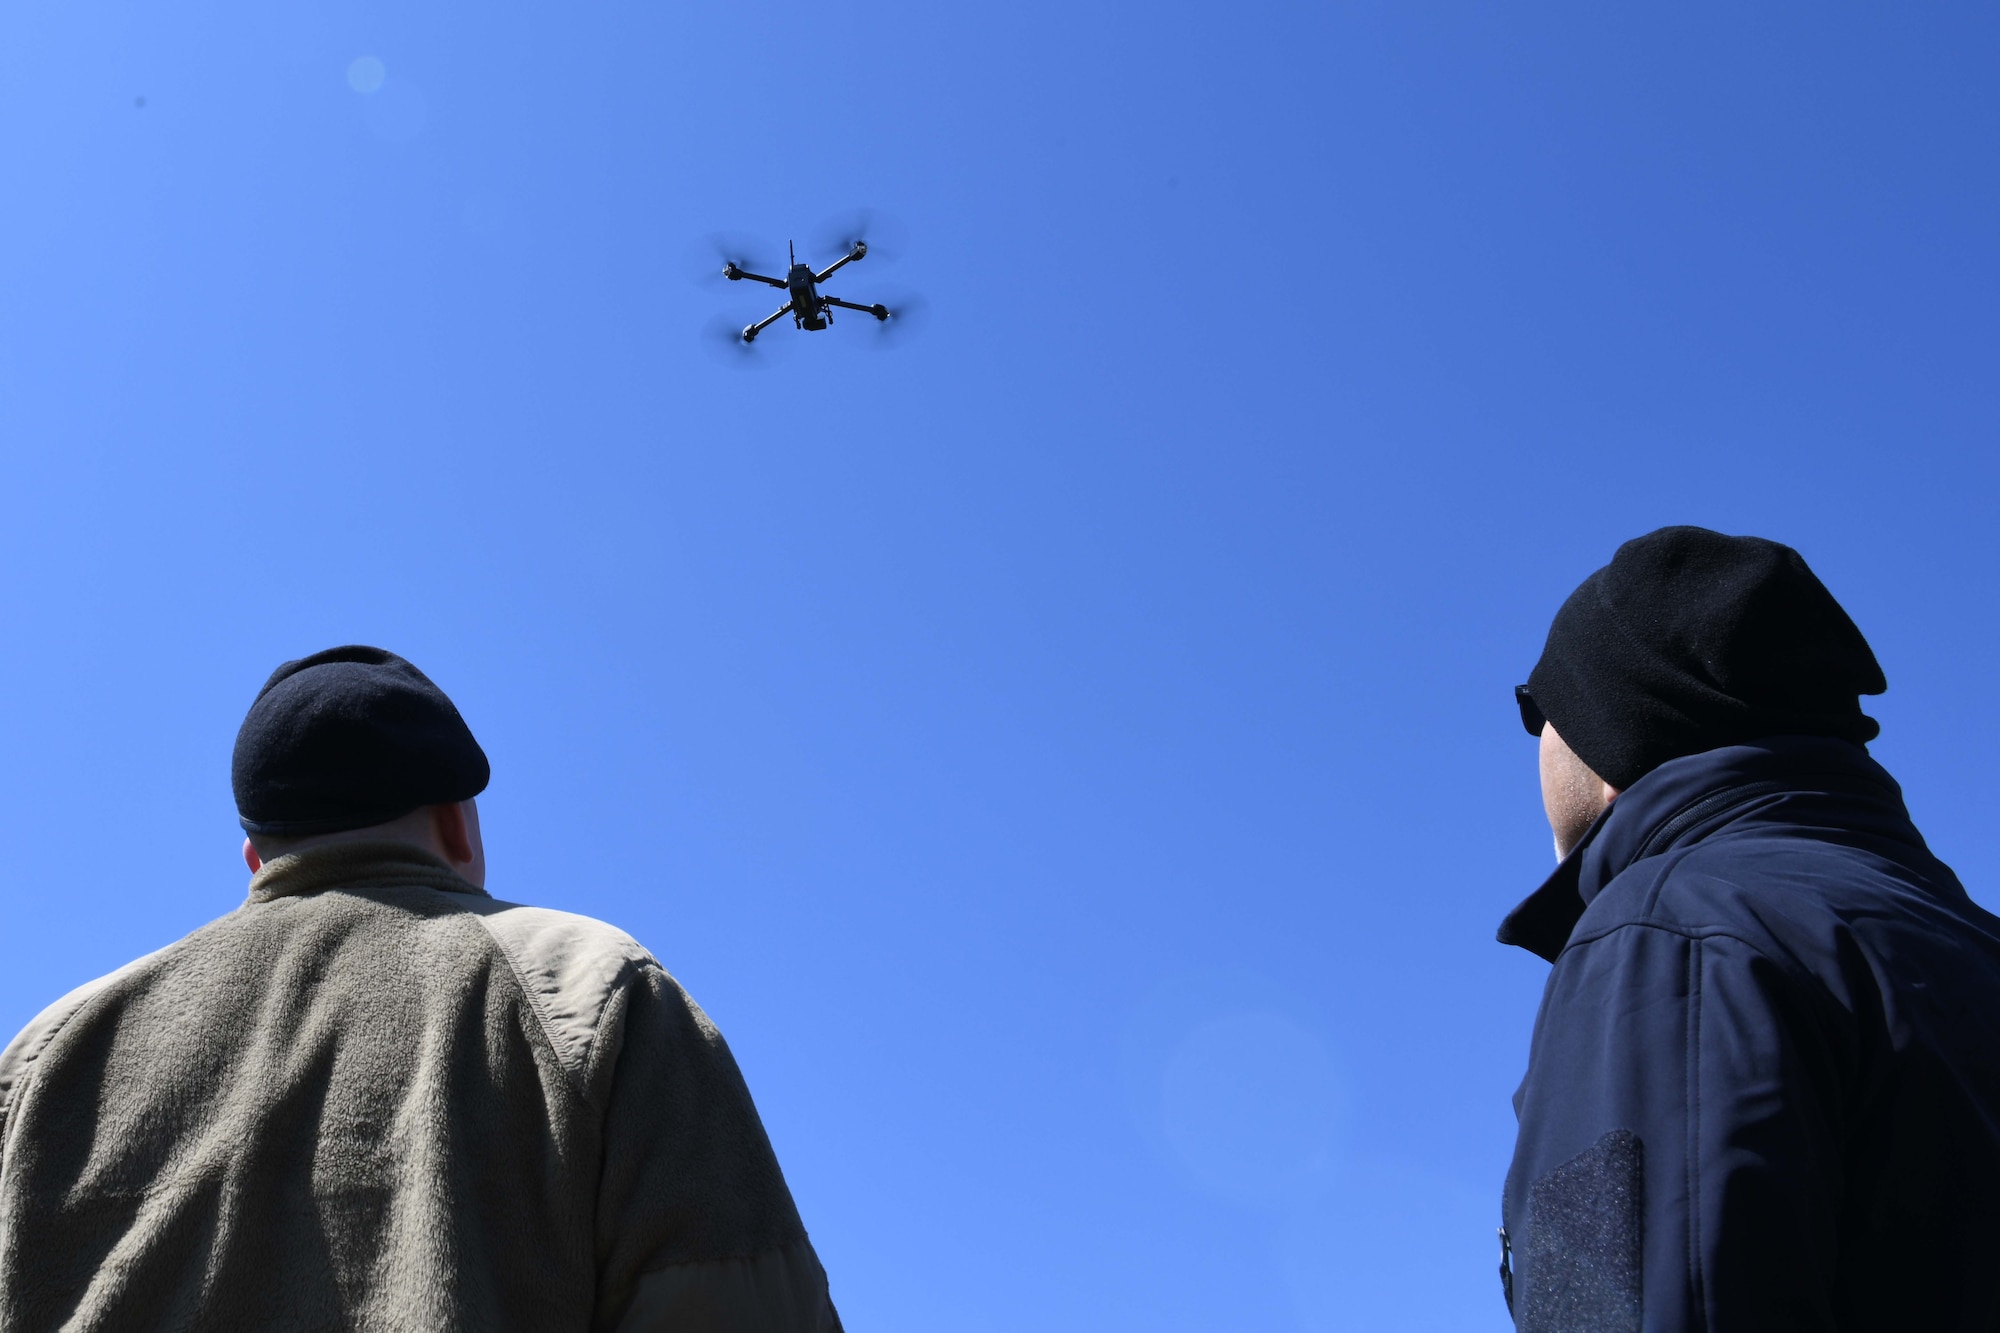 How Drones Are Used for Search and Rescue, Skydio